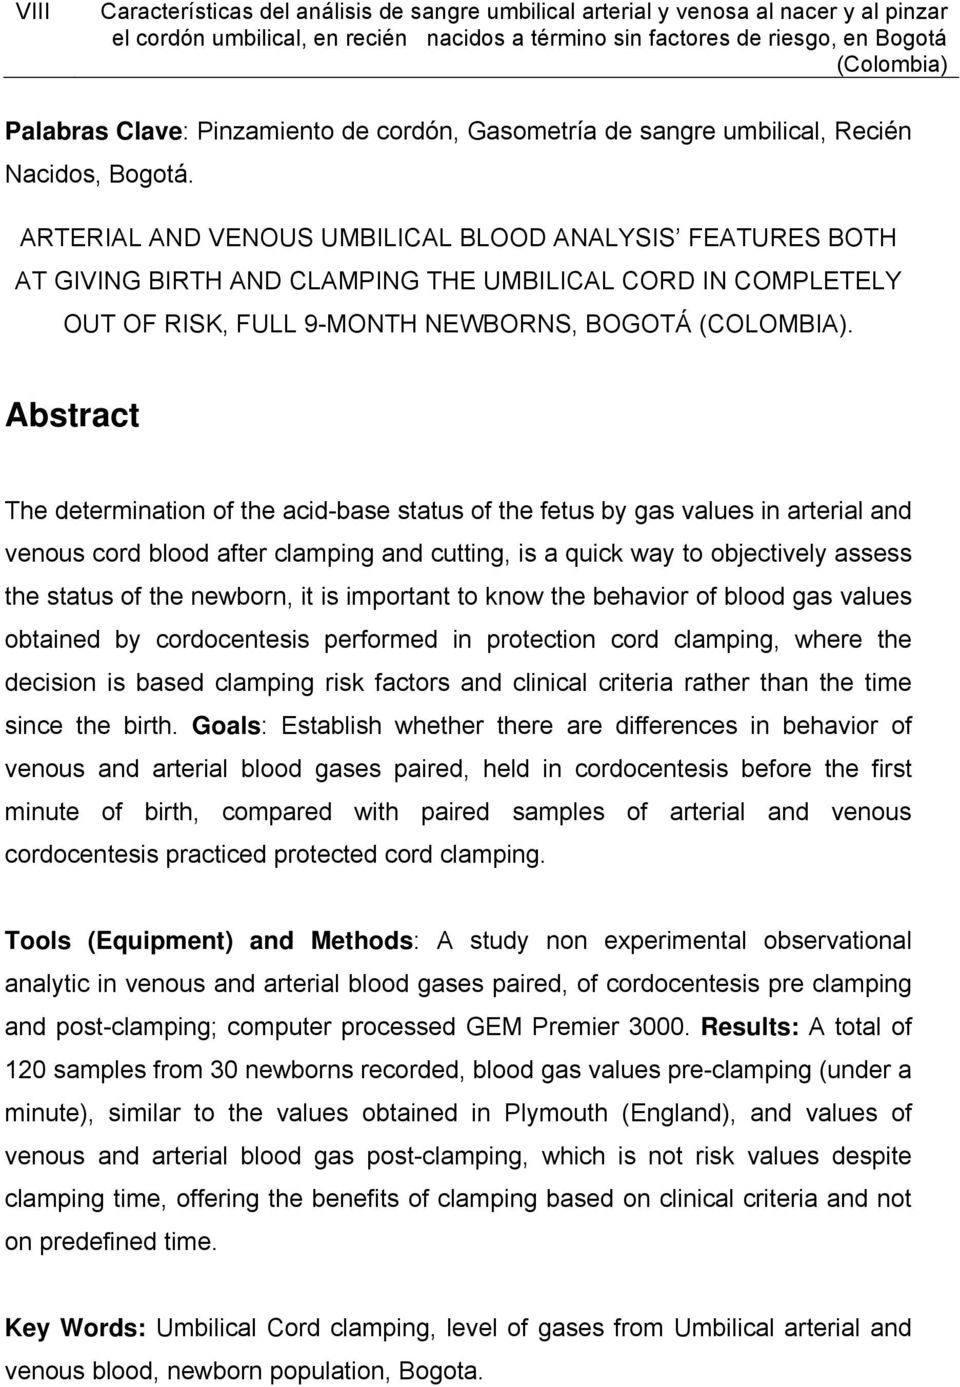 ARTERIAL AND VENOUS UMBILICAL BLOOD ANALYSIS FEATURES BOTH AT GIVING BIRTH AND CLAMPING THE UMBILICAL CORD IN COMPLETELY OUT OF RISK, FULL 9-MONTH NEWBORNS, BOGOTÁ (COLOMBIA).